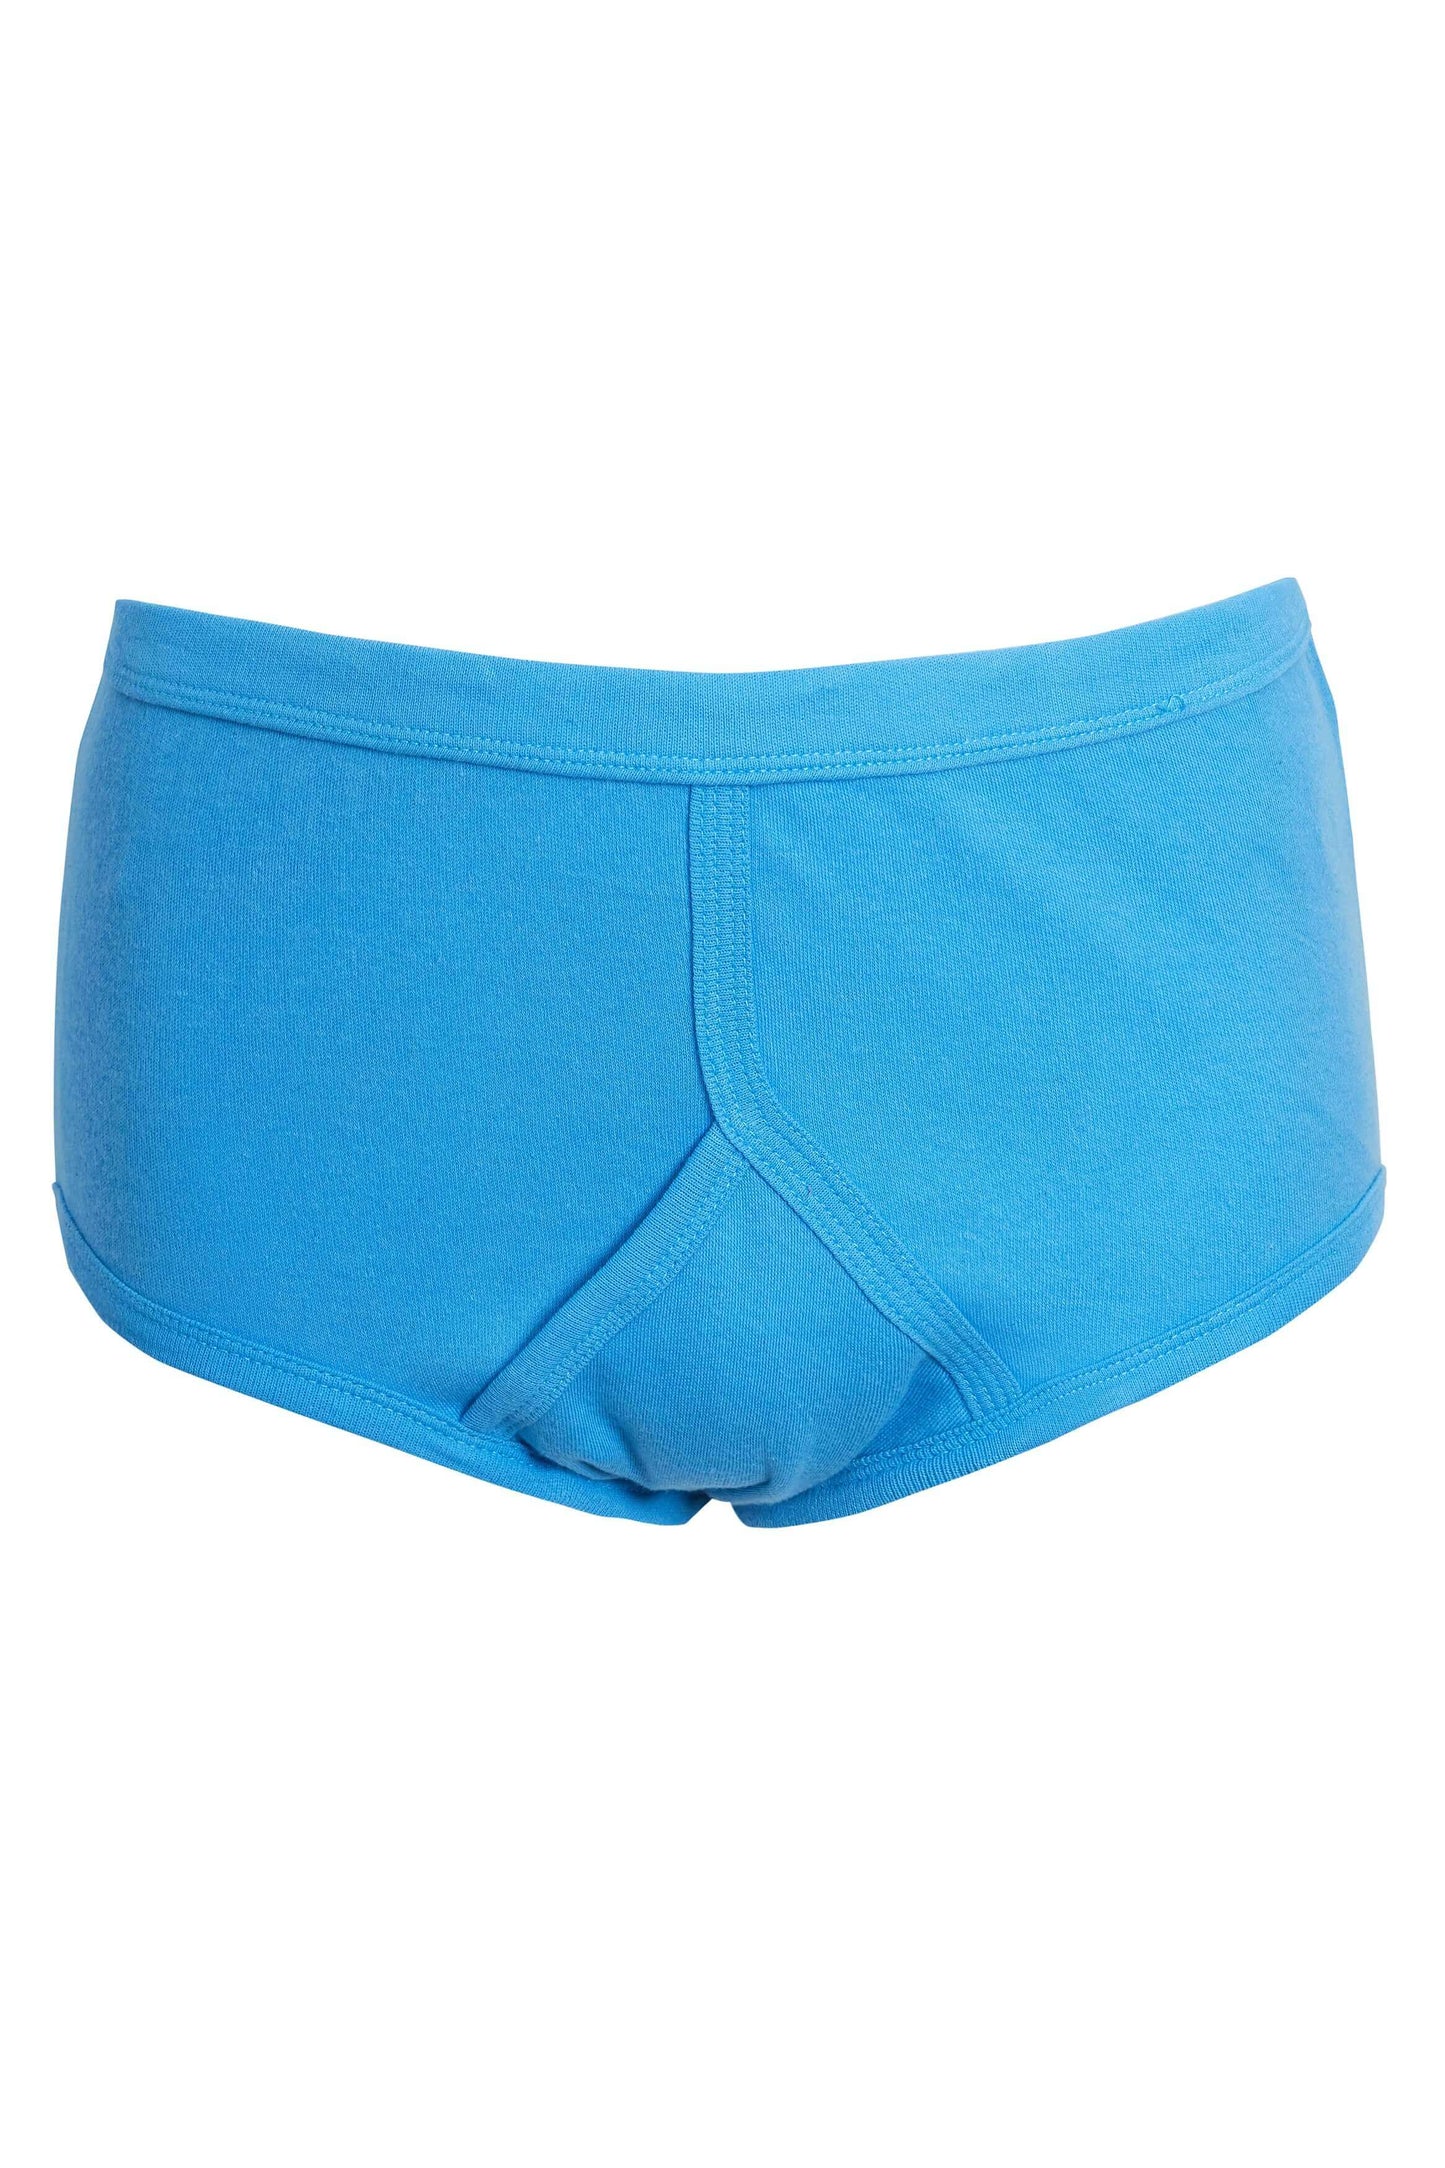 Pack Of 6 Men's Organic Cotton Y Fronts Underpants Sports Underwear. Buy now for £13.00. A Underwear by Sock Stack. assorted, blue, bottom, boys, briefs, christmas, clothing, comfortable, cotton, man, mens, navy, pants, shorts, small, sports, trunks, Unde